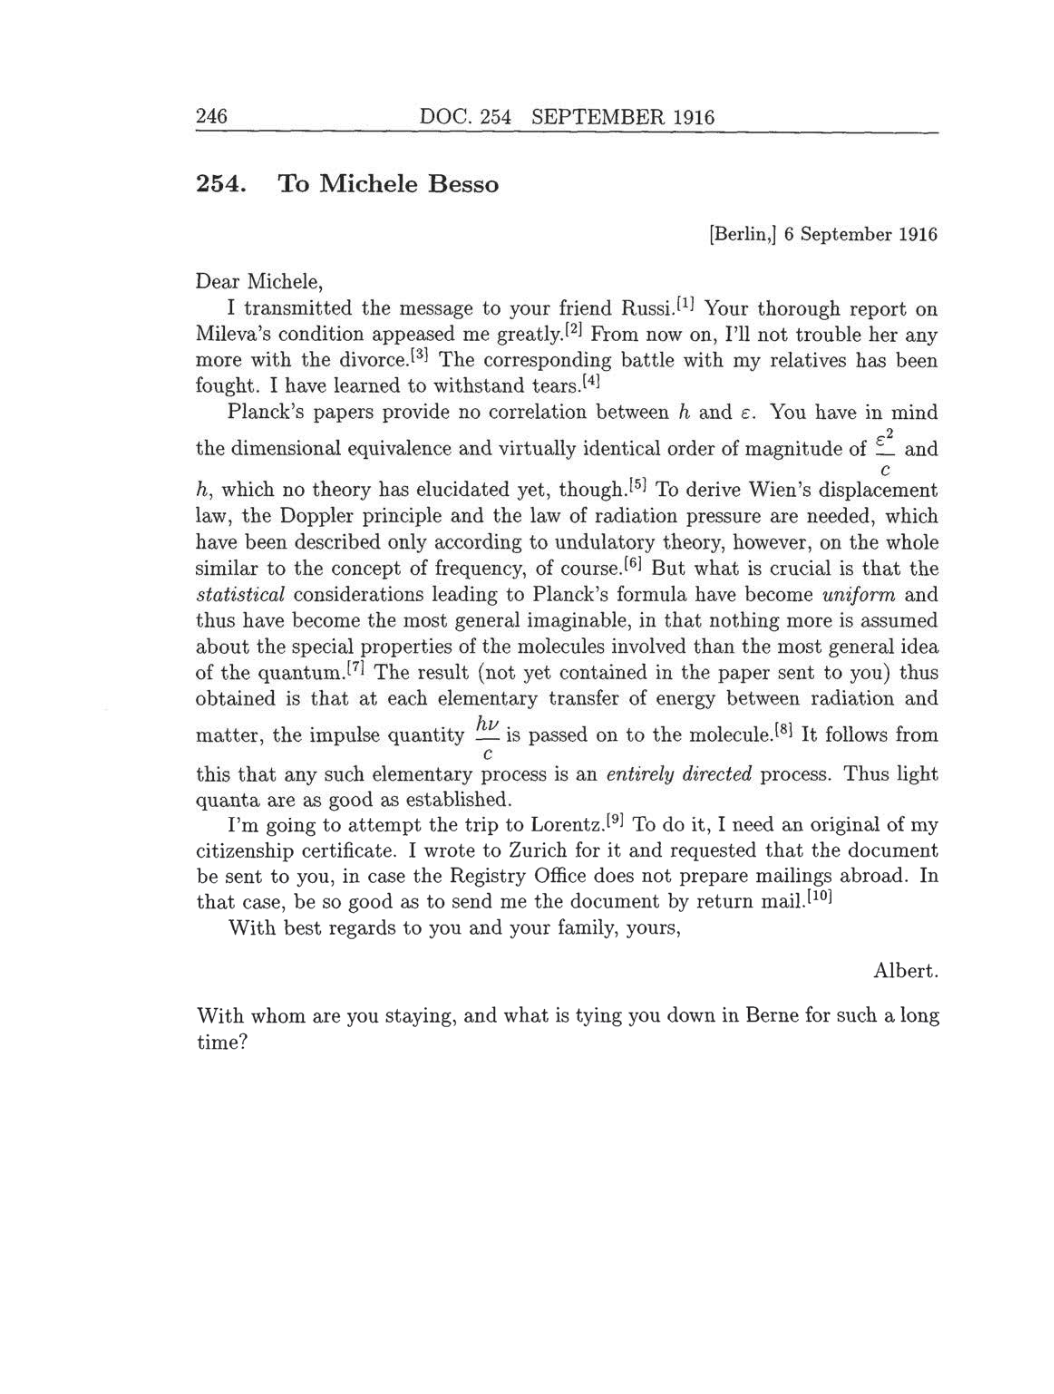 Volume 8: The Berlin Years: Correspondence, 1914-1918 (English translation supplement) page 246